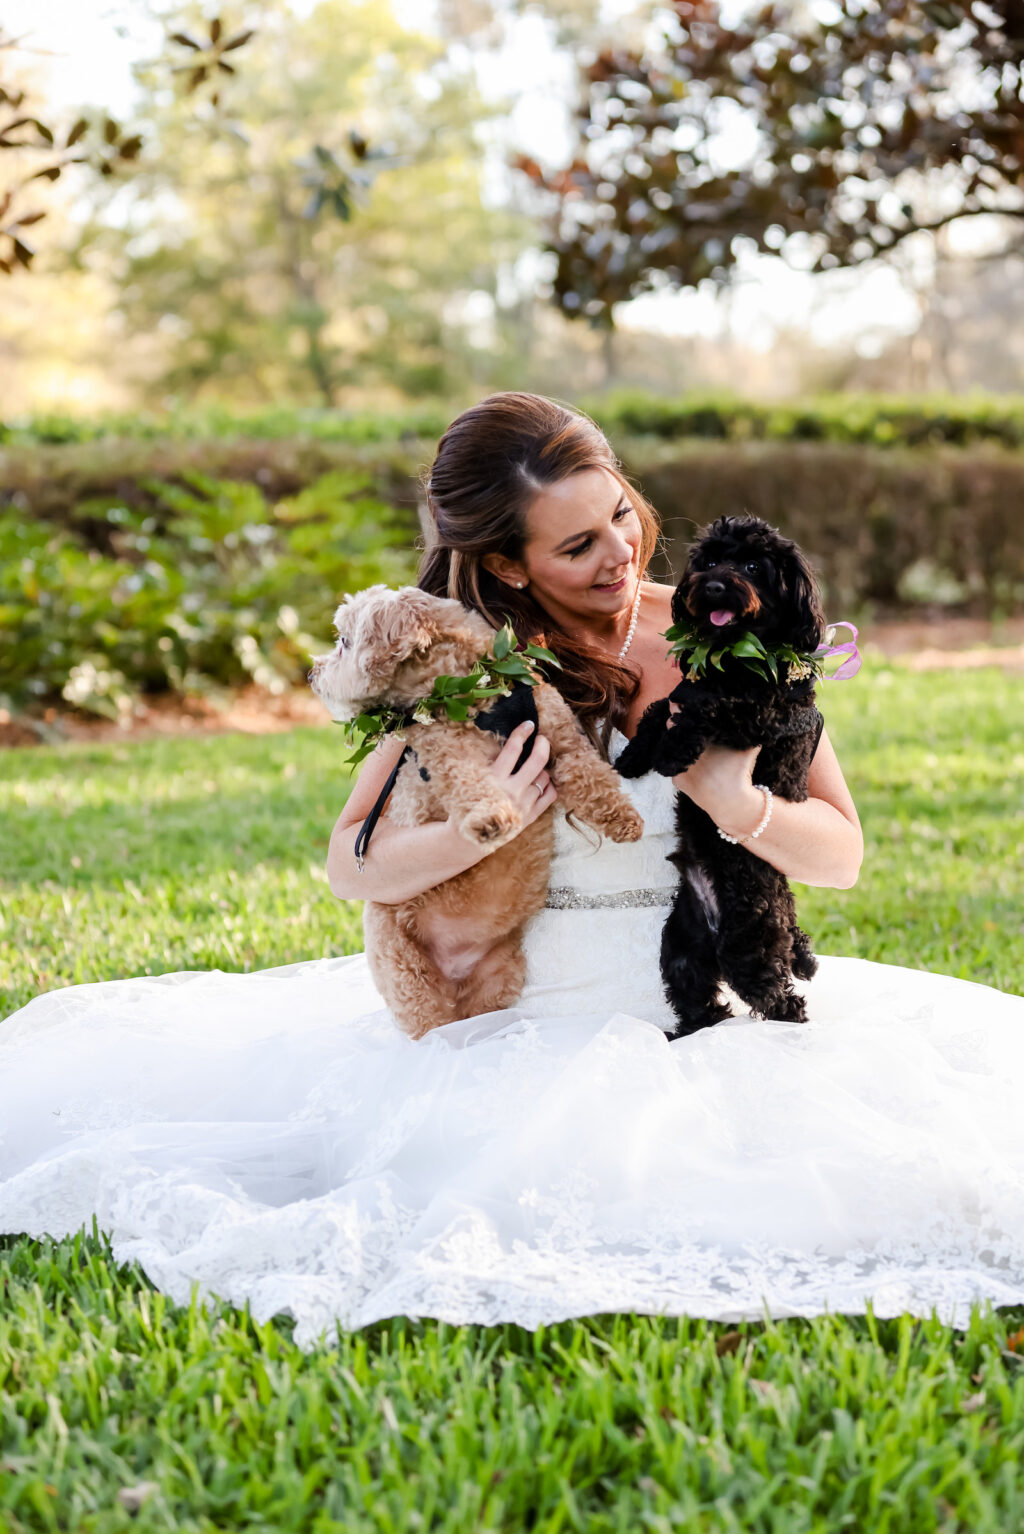 Romantic Classic Bride Sitting On Grass with Two Dogs | Tampa Bay Wedding Photographer Lifelong Photography Studio | Wedding Hair and Makeup Michele Renee the Studio | Wedding Pet Planner FairyTail Pet Care | Wedding Dress Truly Forever Bridal